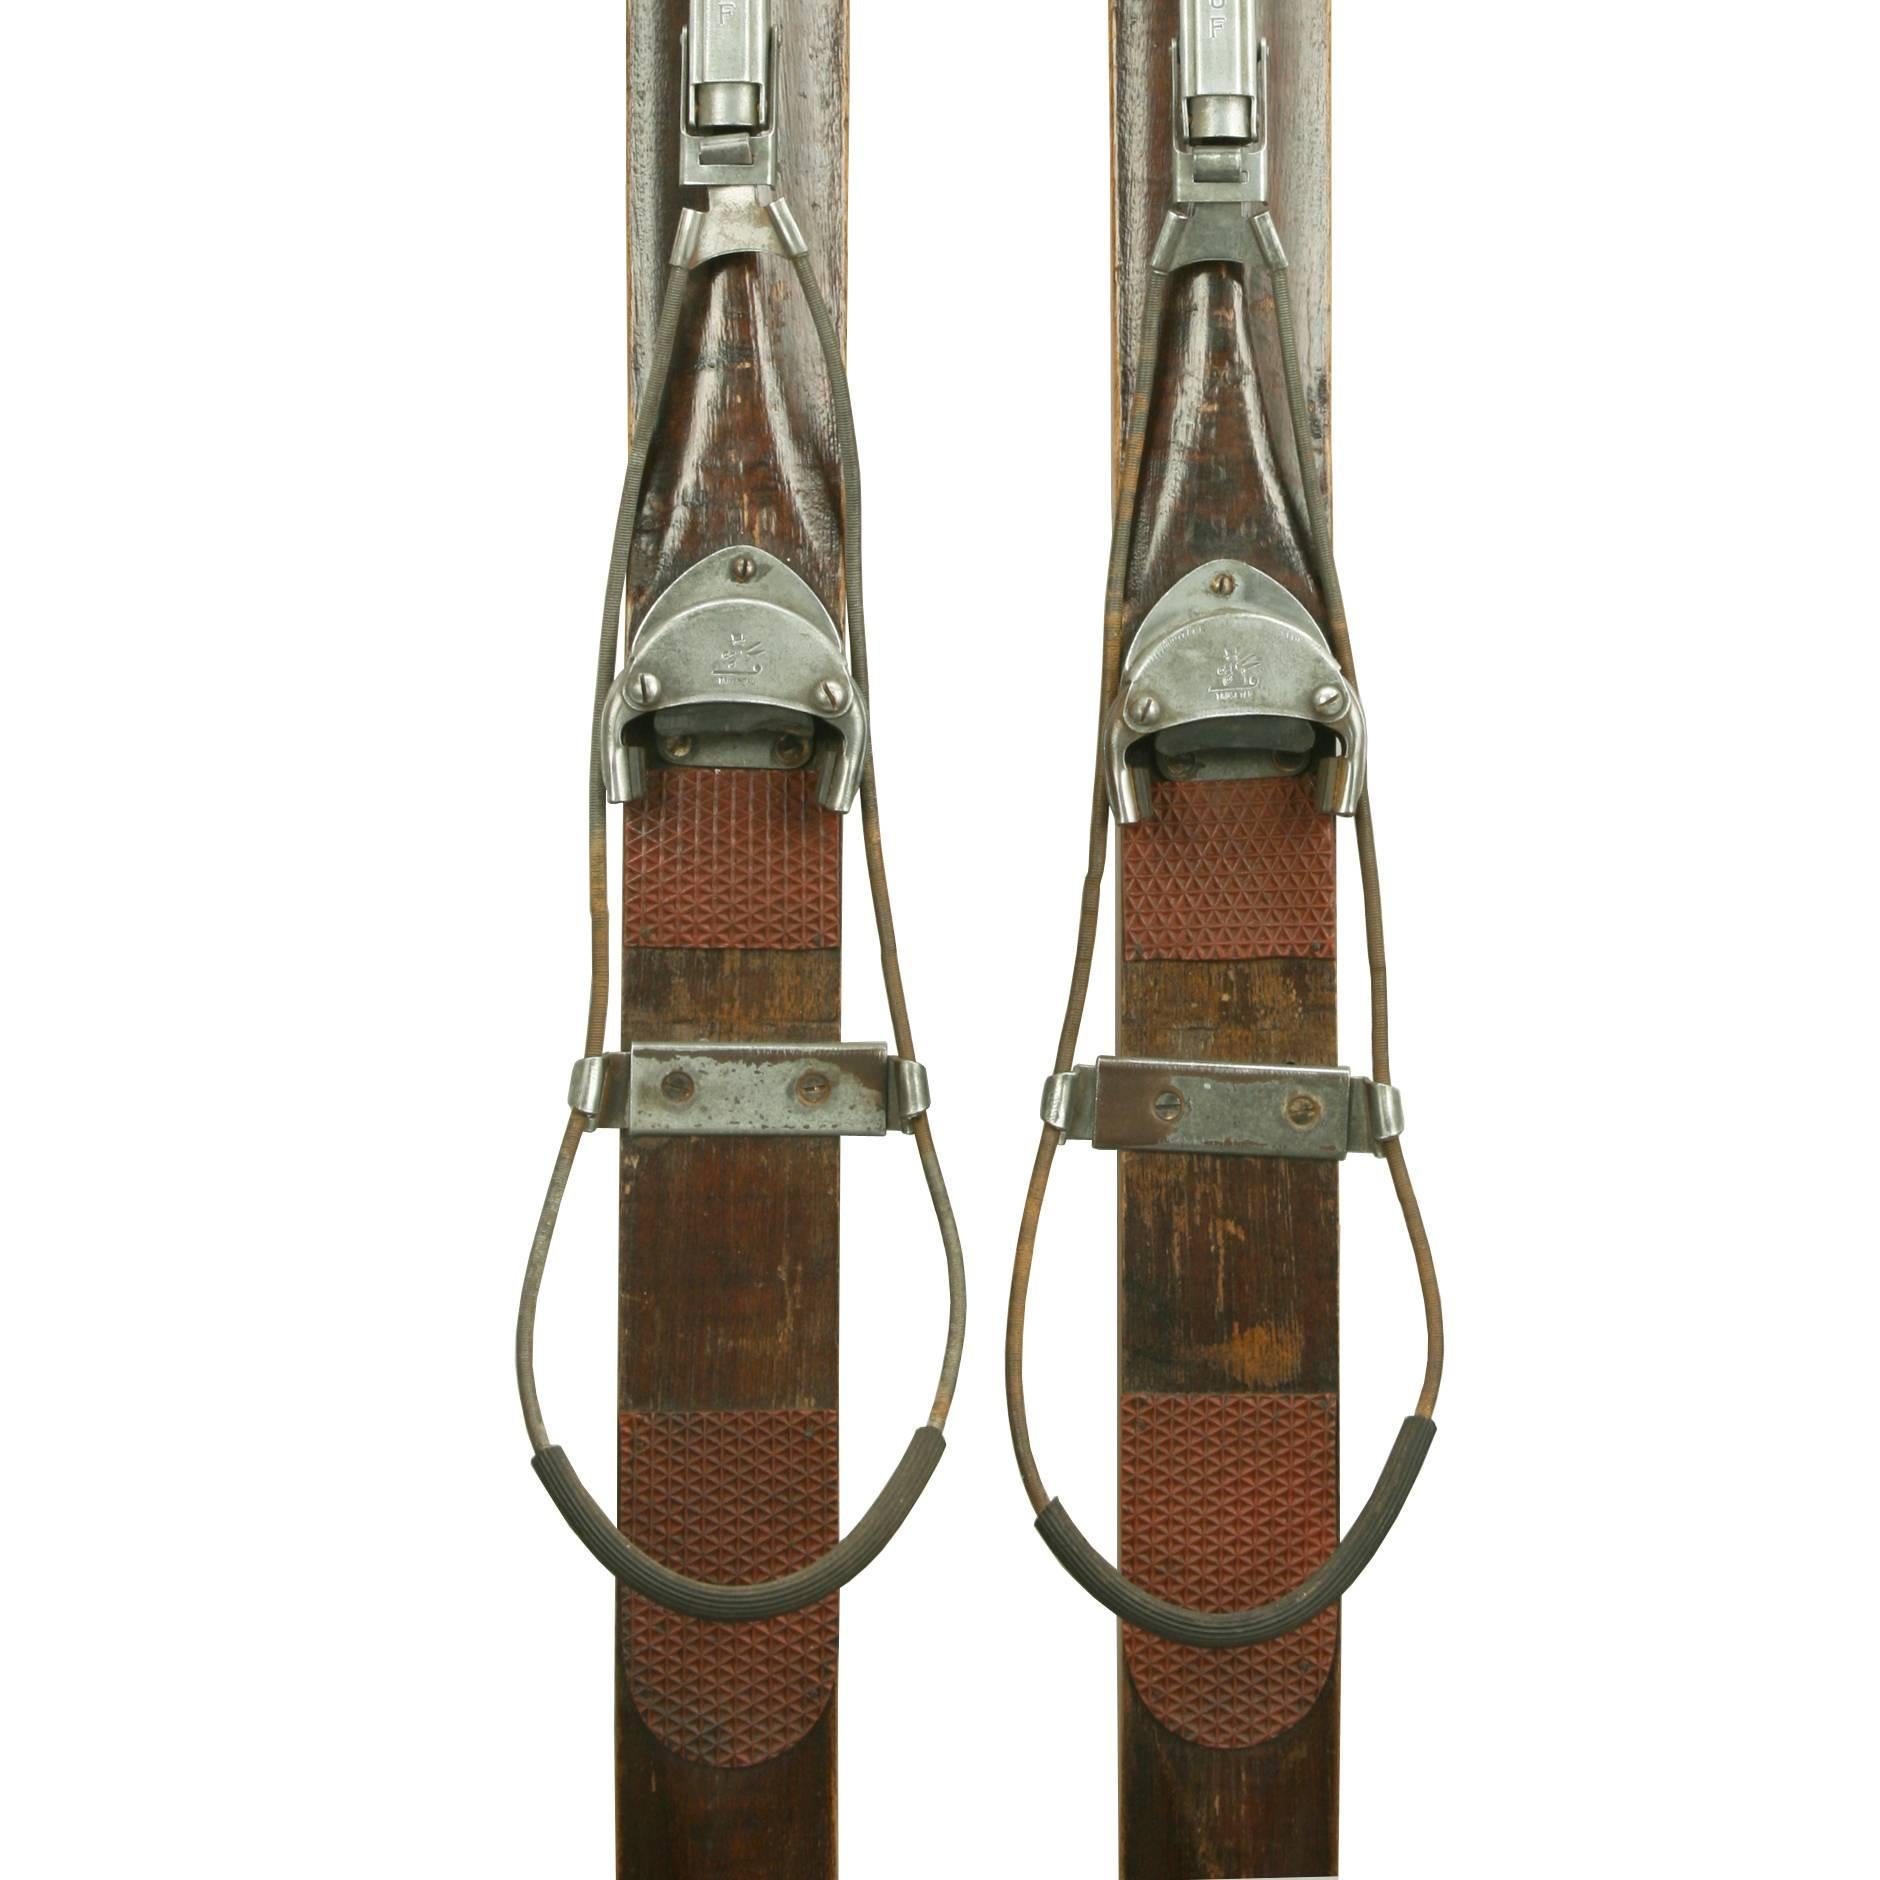 A nice pair of ridge top ash skis with rubber foot plates and galvanized safety bindings. The bindings have a Trusetal toe unit that was designed to allow the toe of the boot to pop out during a fall. The binding plate is marked 'TRUSETAL' with a